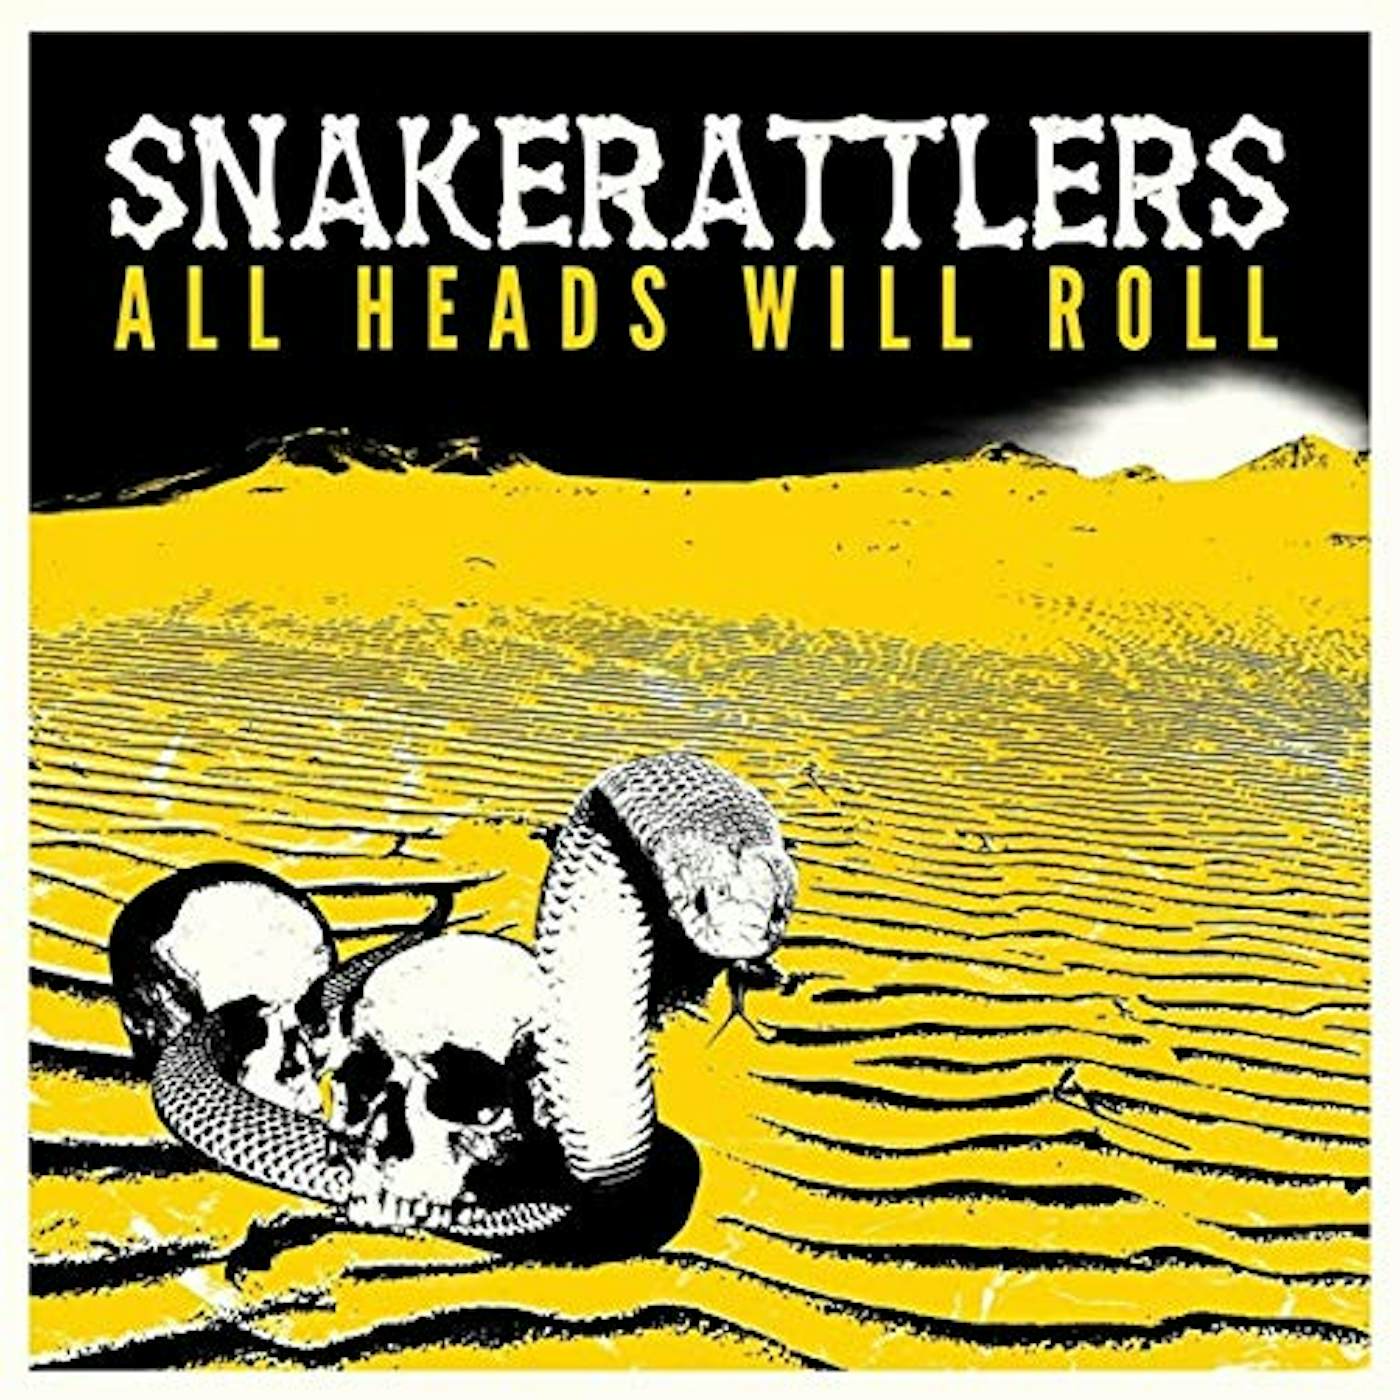 Snakerattlers ALL HEADS WILL ROLL CD